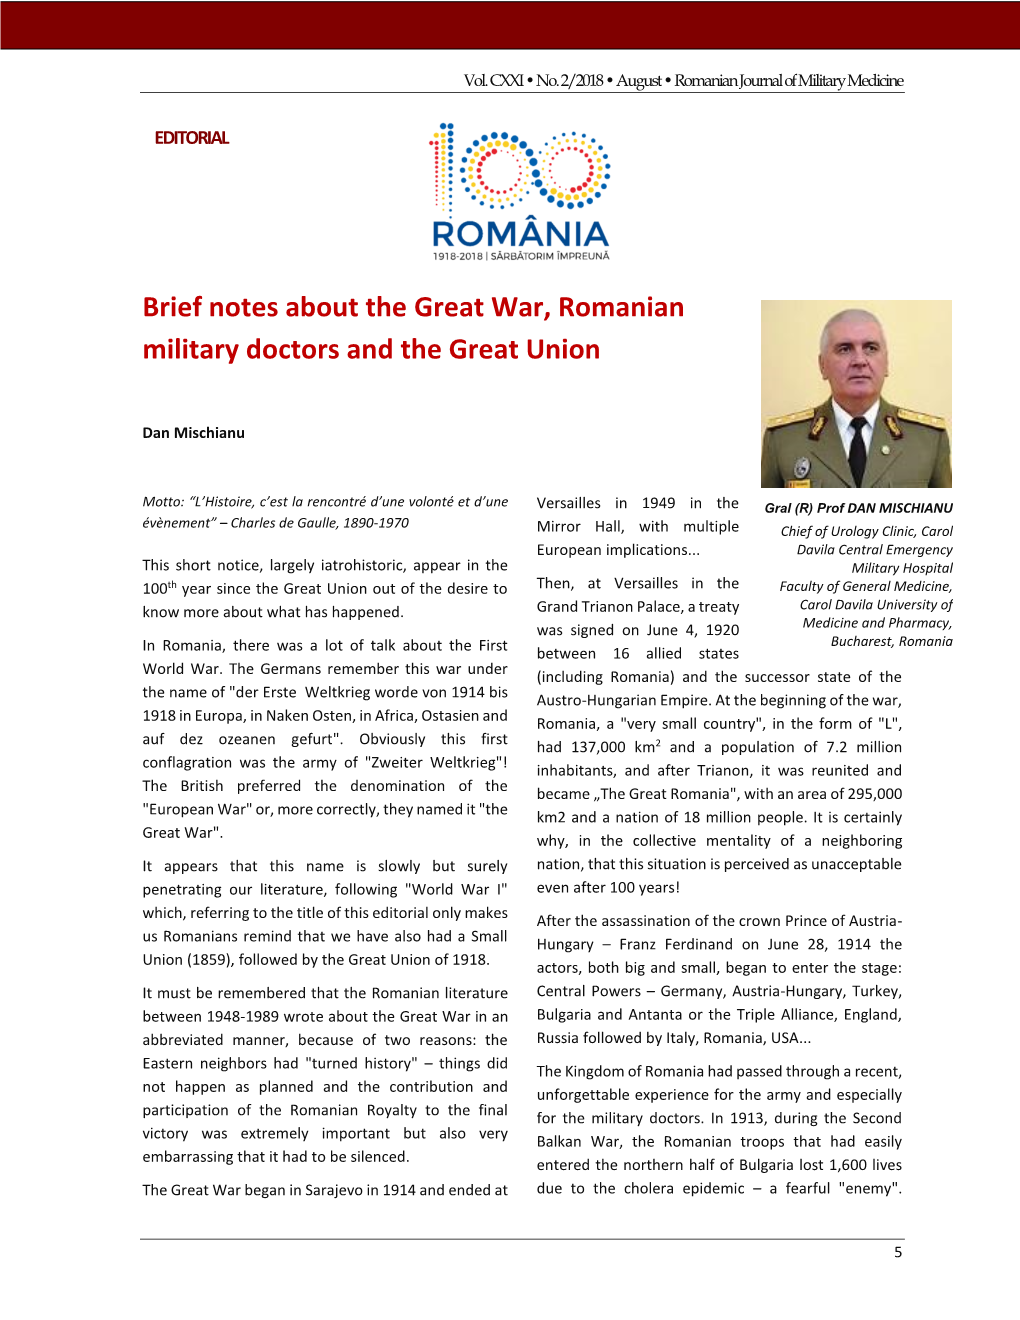 Brief Notes About the Great War, Romanian Military Doctors and the Great Union